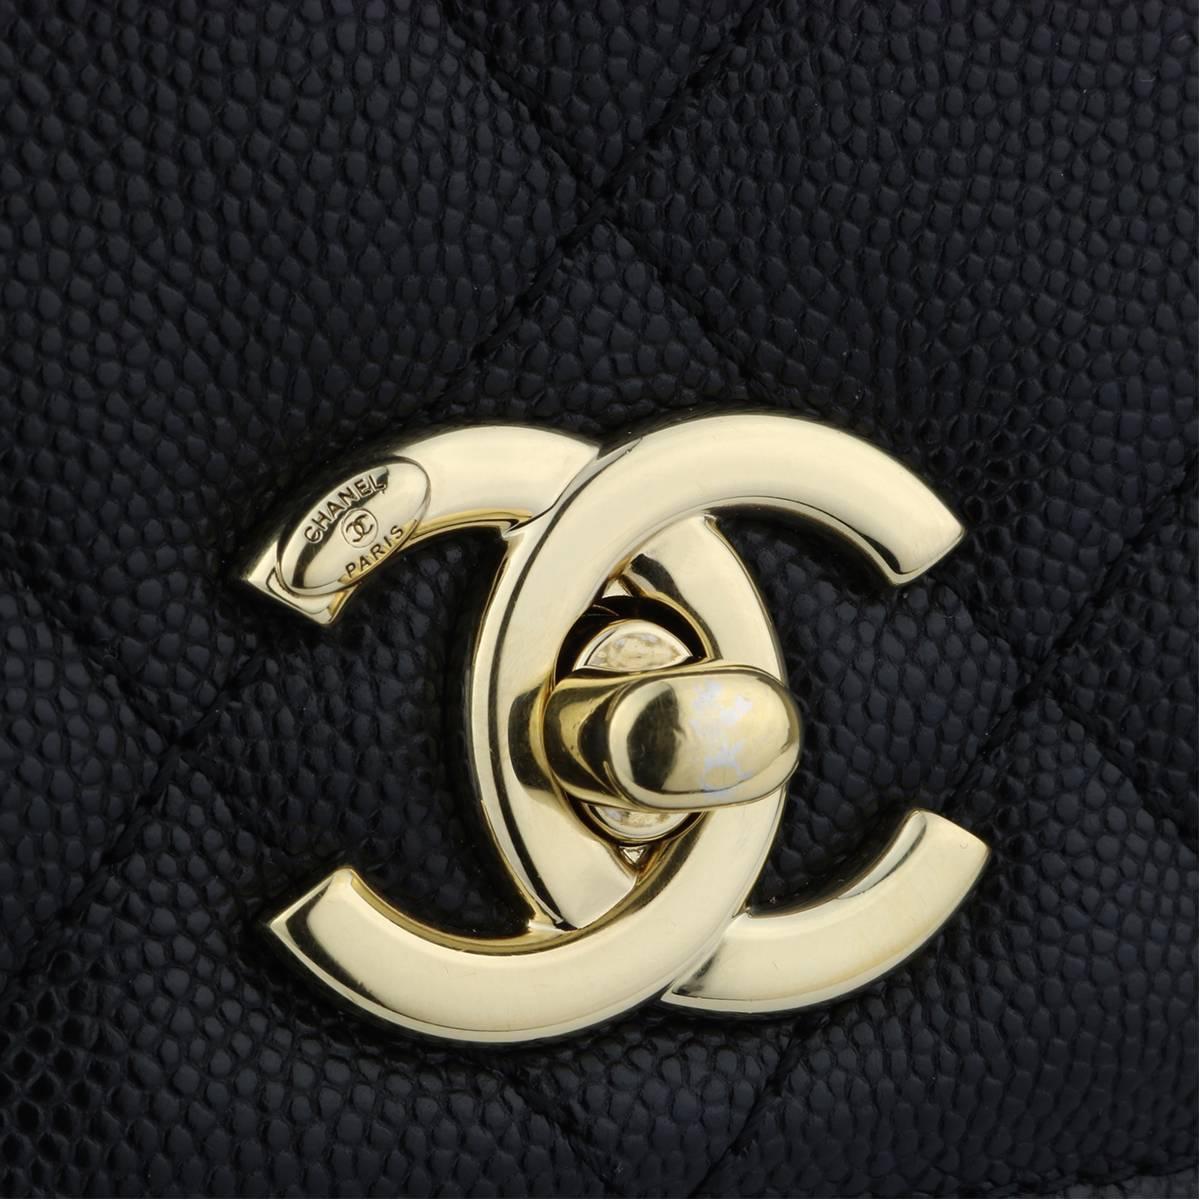 Authentic CHANEL Business Affinity Medium Black Caviar with Champagne Hardware 2017.

This stunning bag is in a mint condition, the bag still holds its original shape, and the hardware is still very shiny.

Exterior Condition: Mint condition,